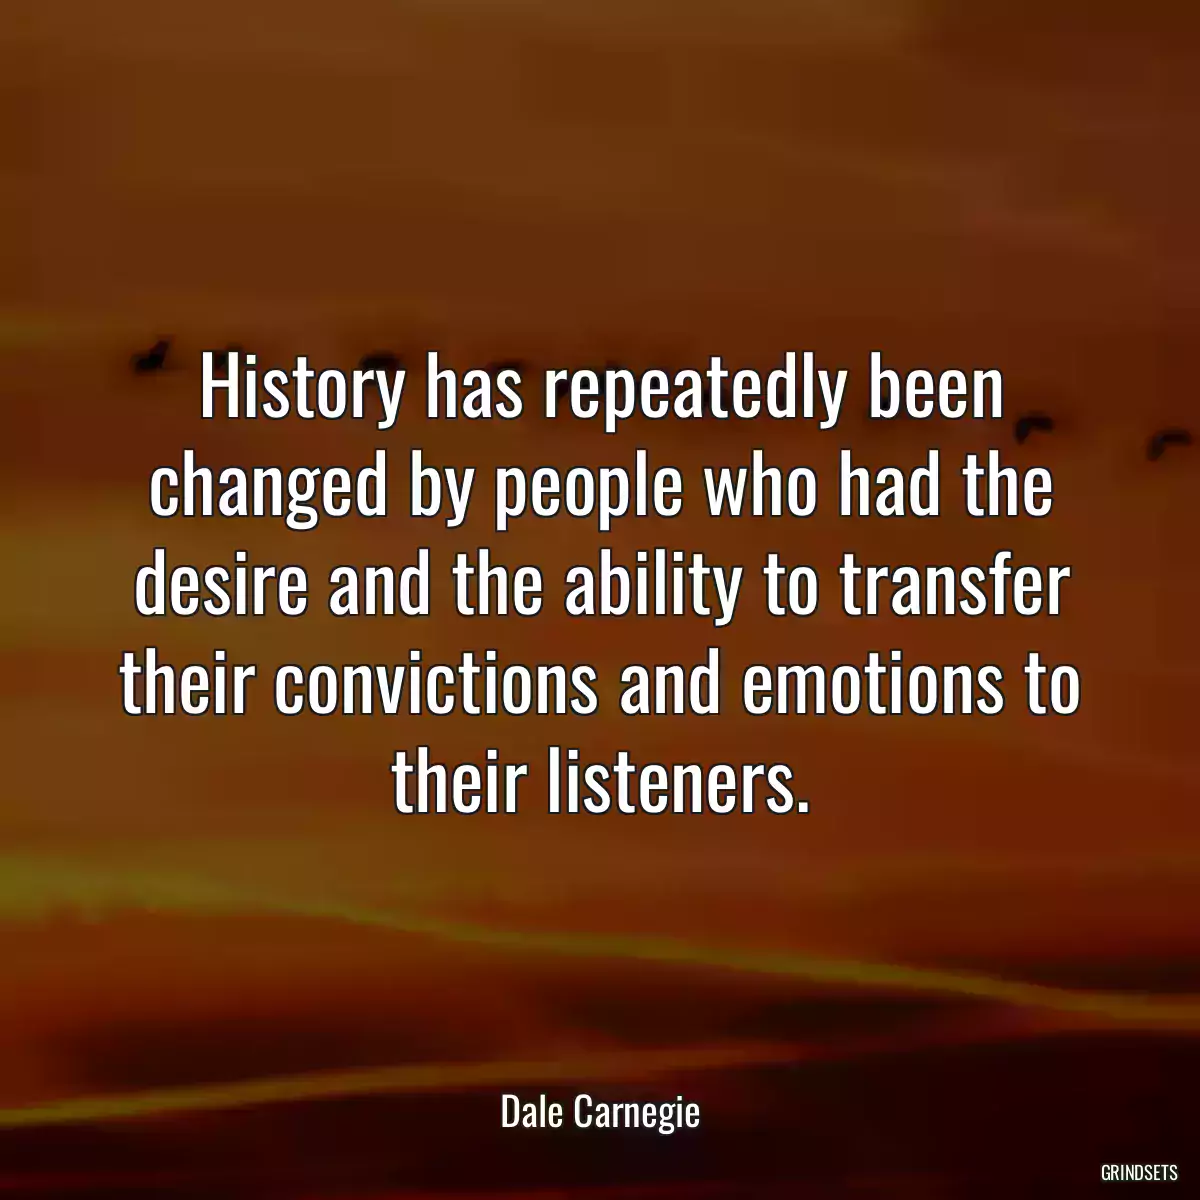 History has repeatedly been changed by people who had the desire and the ability to transfer their convictions and emotions to their listeners.